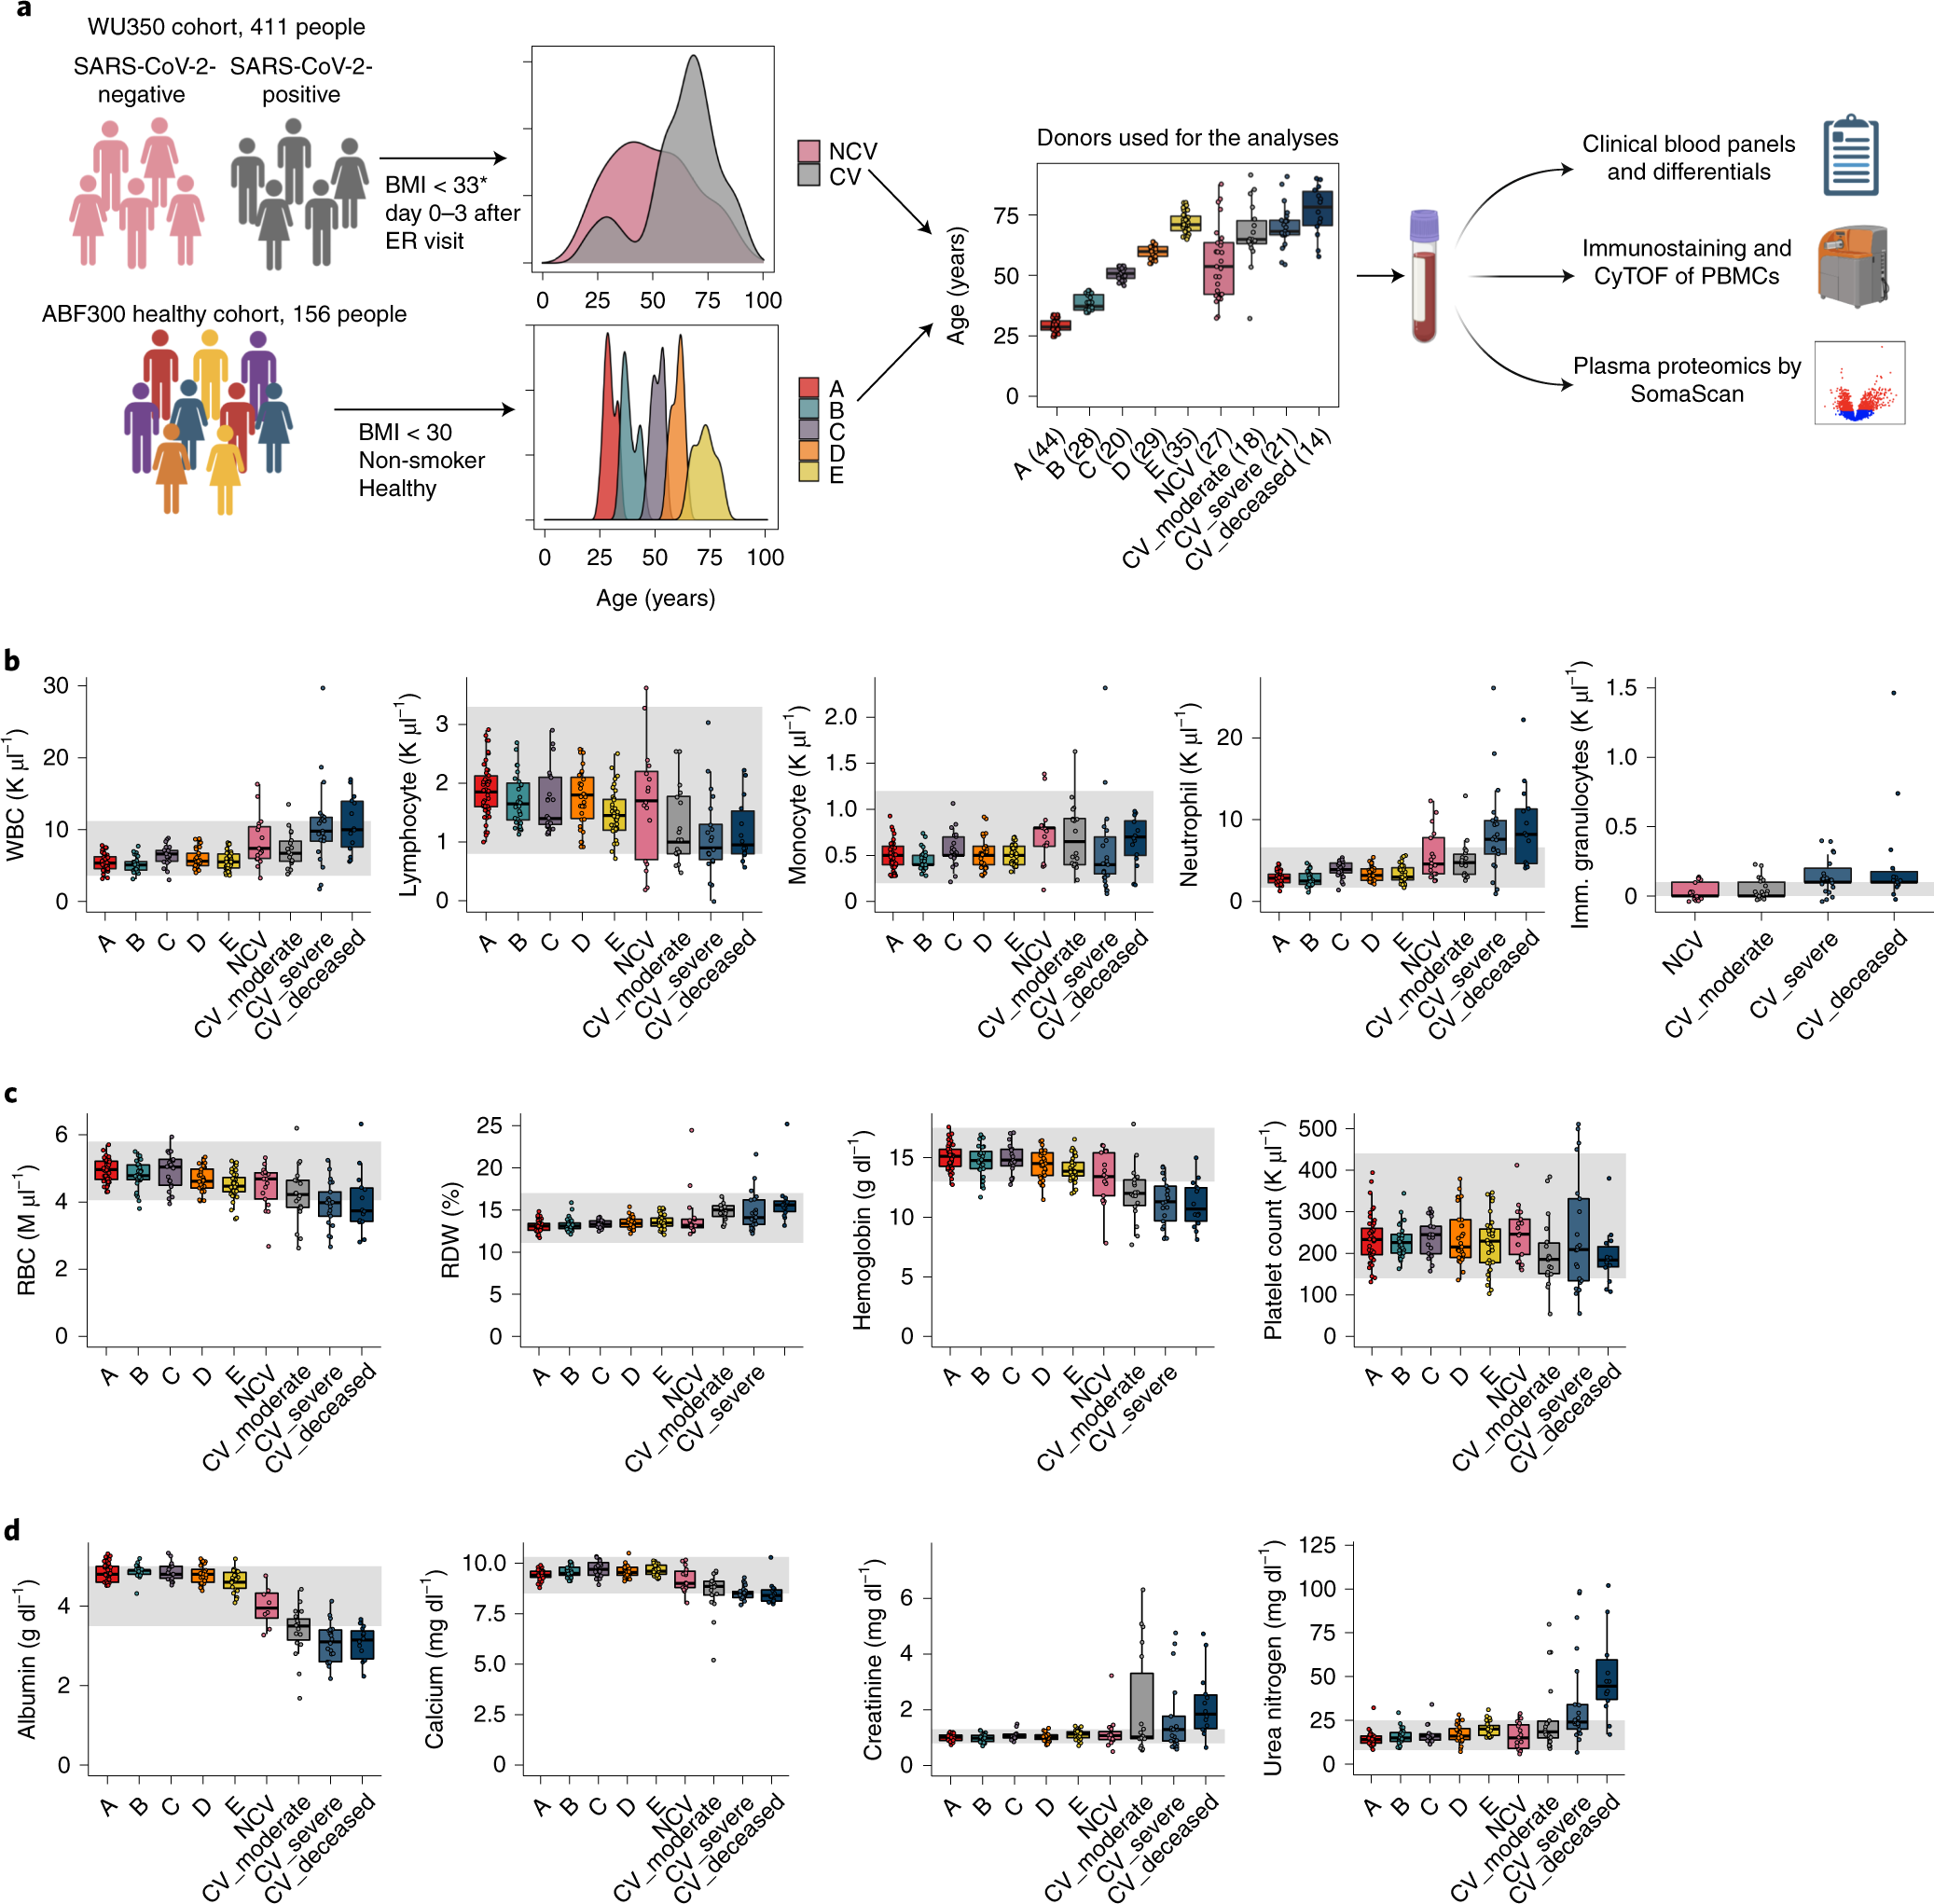 Cellular And Plasma Proteomic Determinants Of Covid 19 And Non Covid 19 Pulmonary Diseases Relative To Healthy Aging Nature Aging